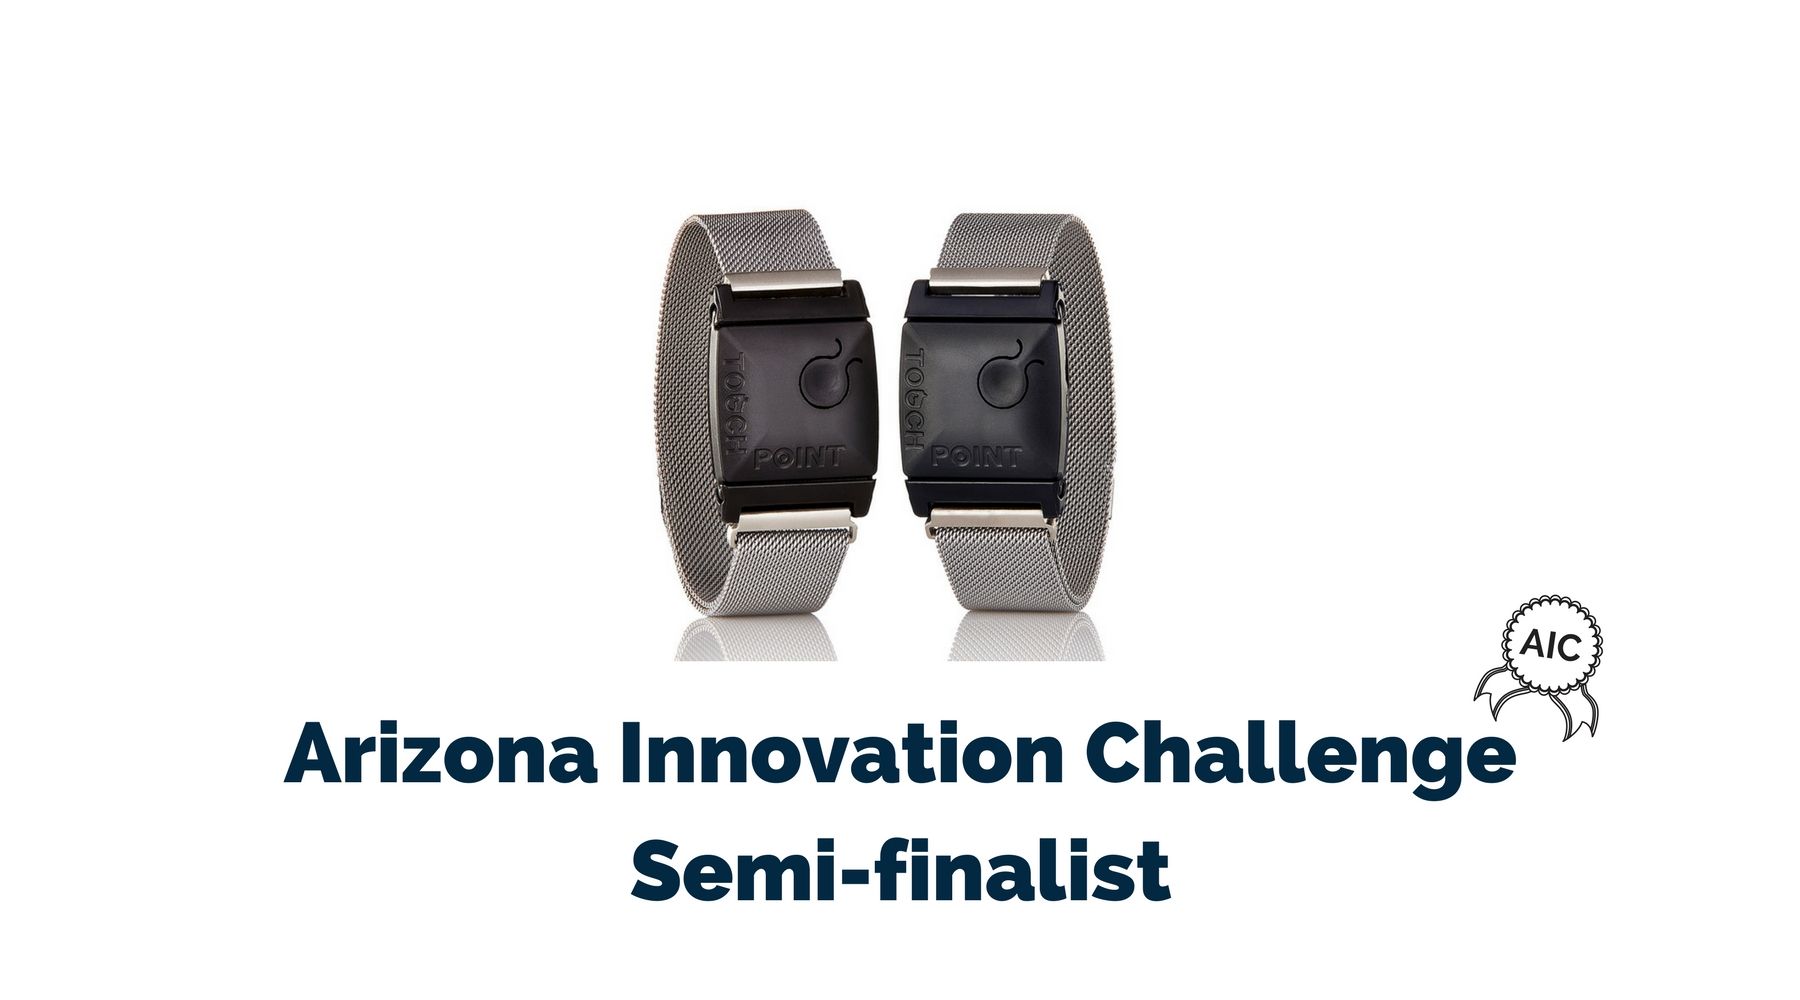 Arizona Innovation Challenge - The TouchPoint Solution™ is one of 25 Semi-finalists!